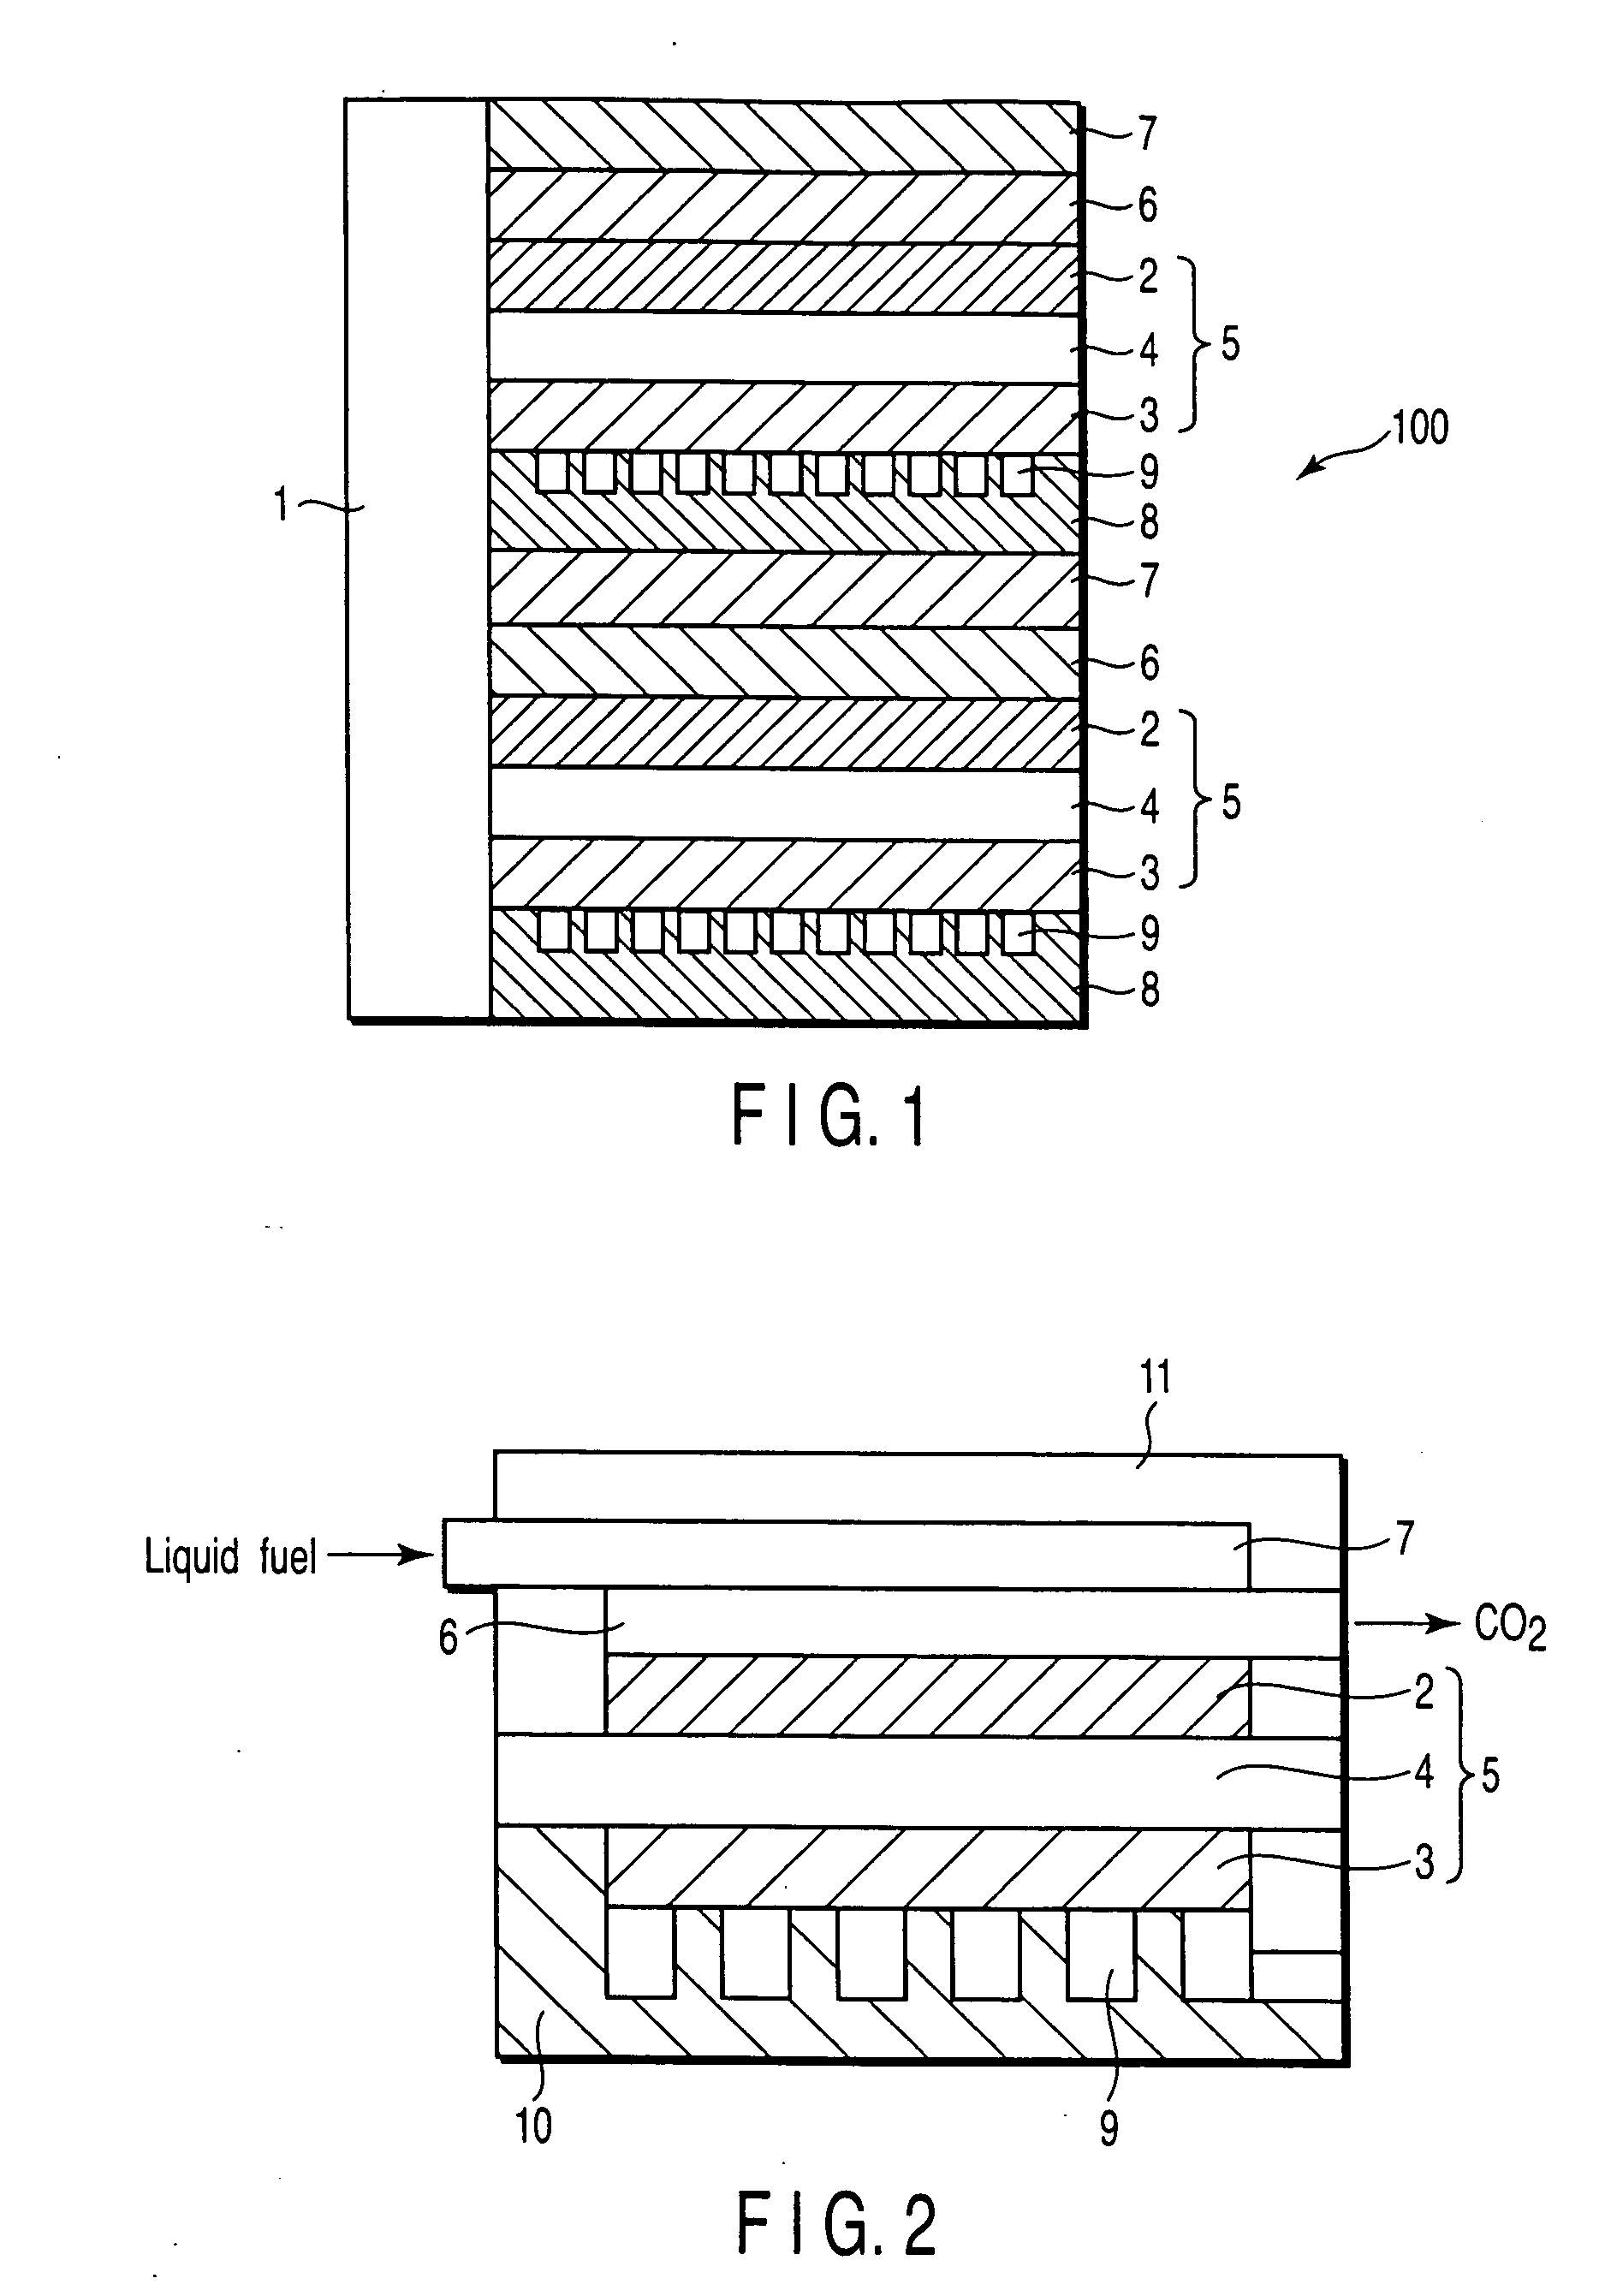 Proton conductive solid electrolyte, proton conductive membrane, electrode for fuel cell, membrane electrode assembly, and fuel cell